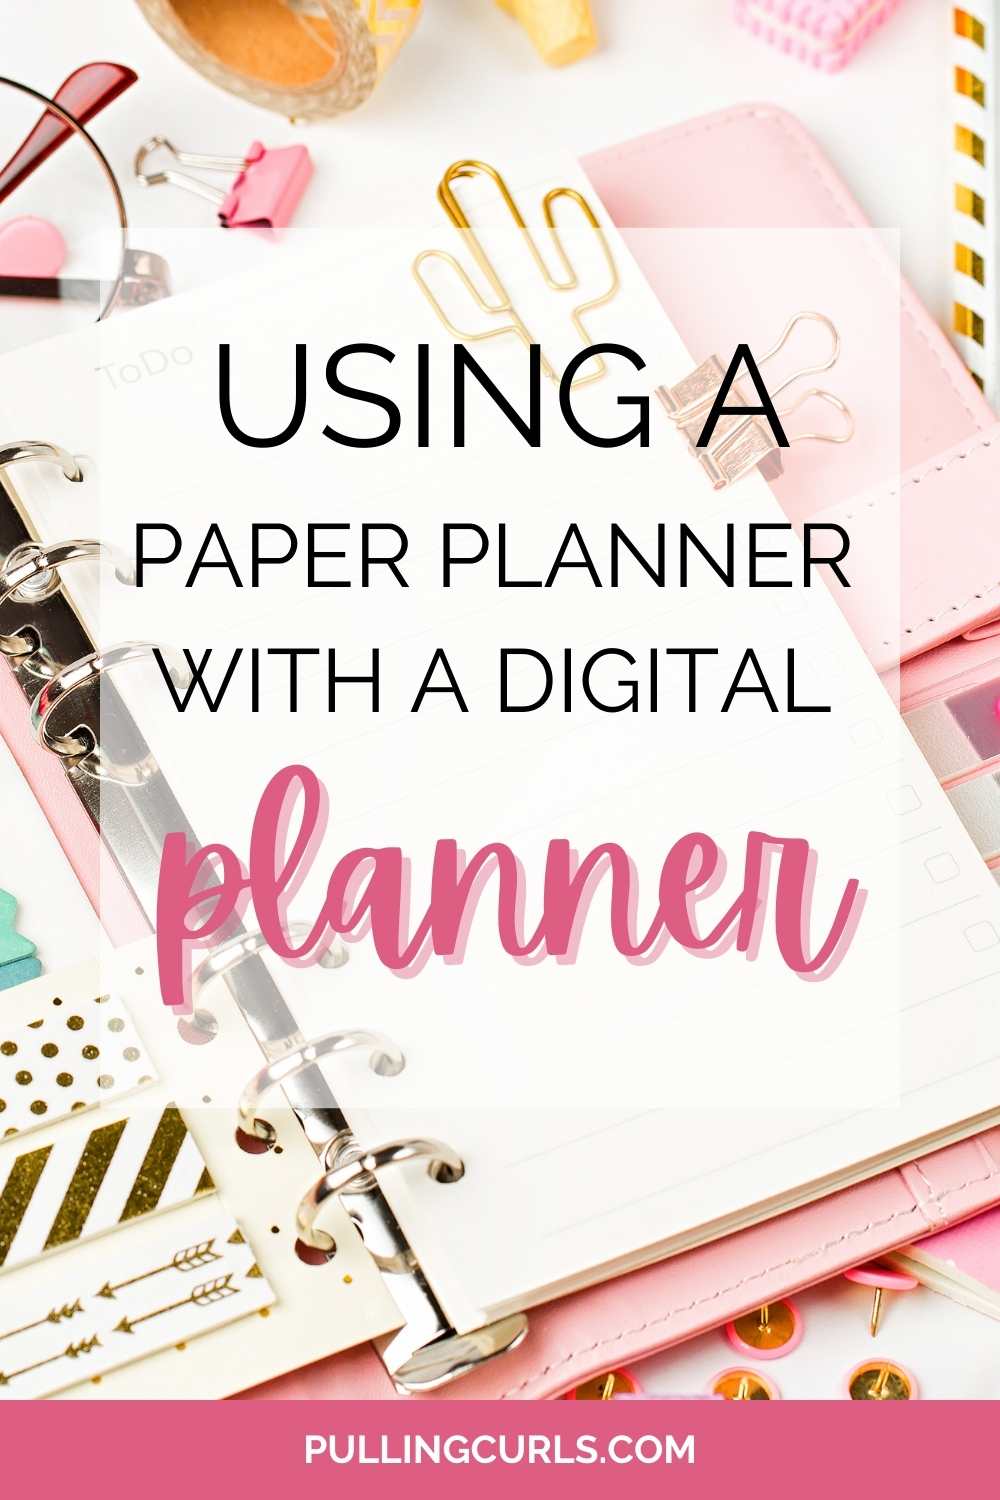 Learning to use a paper planner, along with an online digital planner has so many benefits.  In this post I'll show you how to use a planner (and how I use my happy planner), to help organize, reflect and get priorities straight! #Paperplanner | Ideas | happy planner | Erin Condren | Washi Tape | Best | Life | google Calendar via @pullingcurls